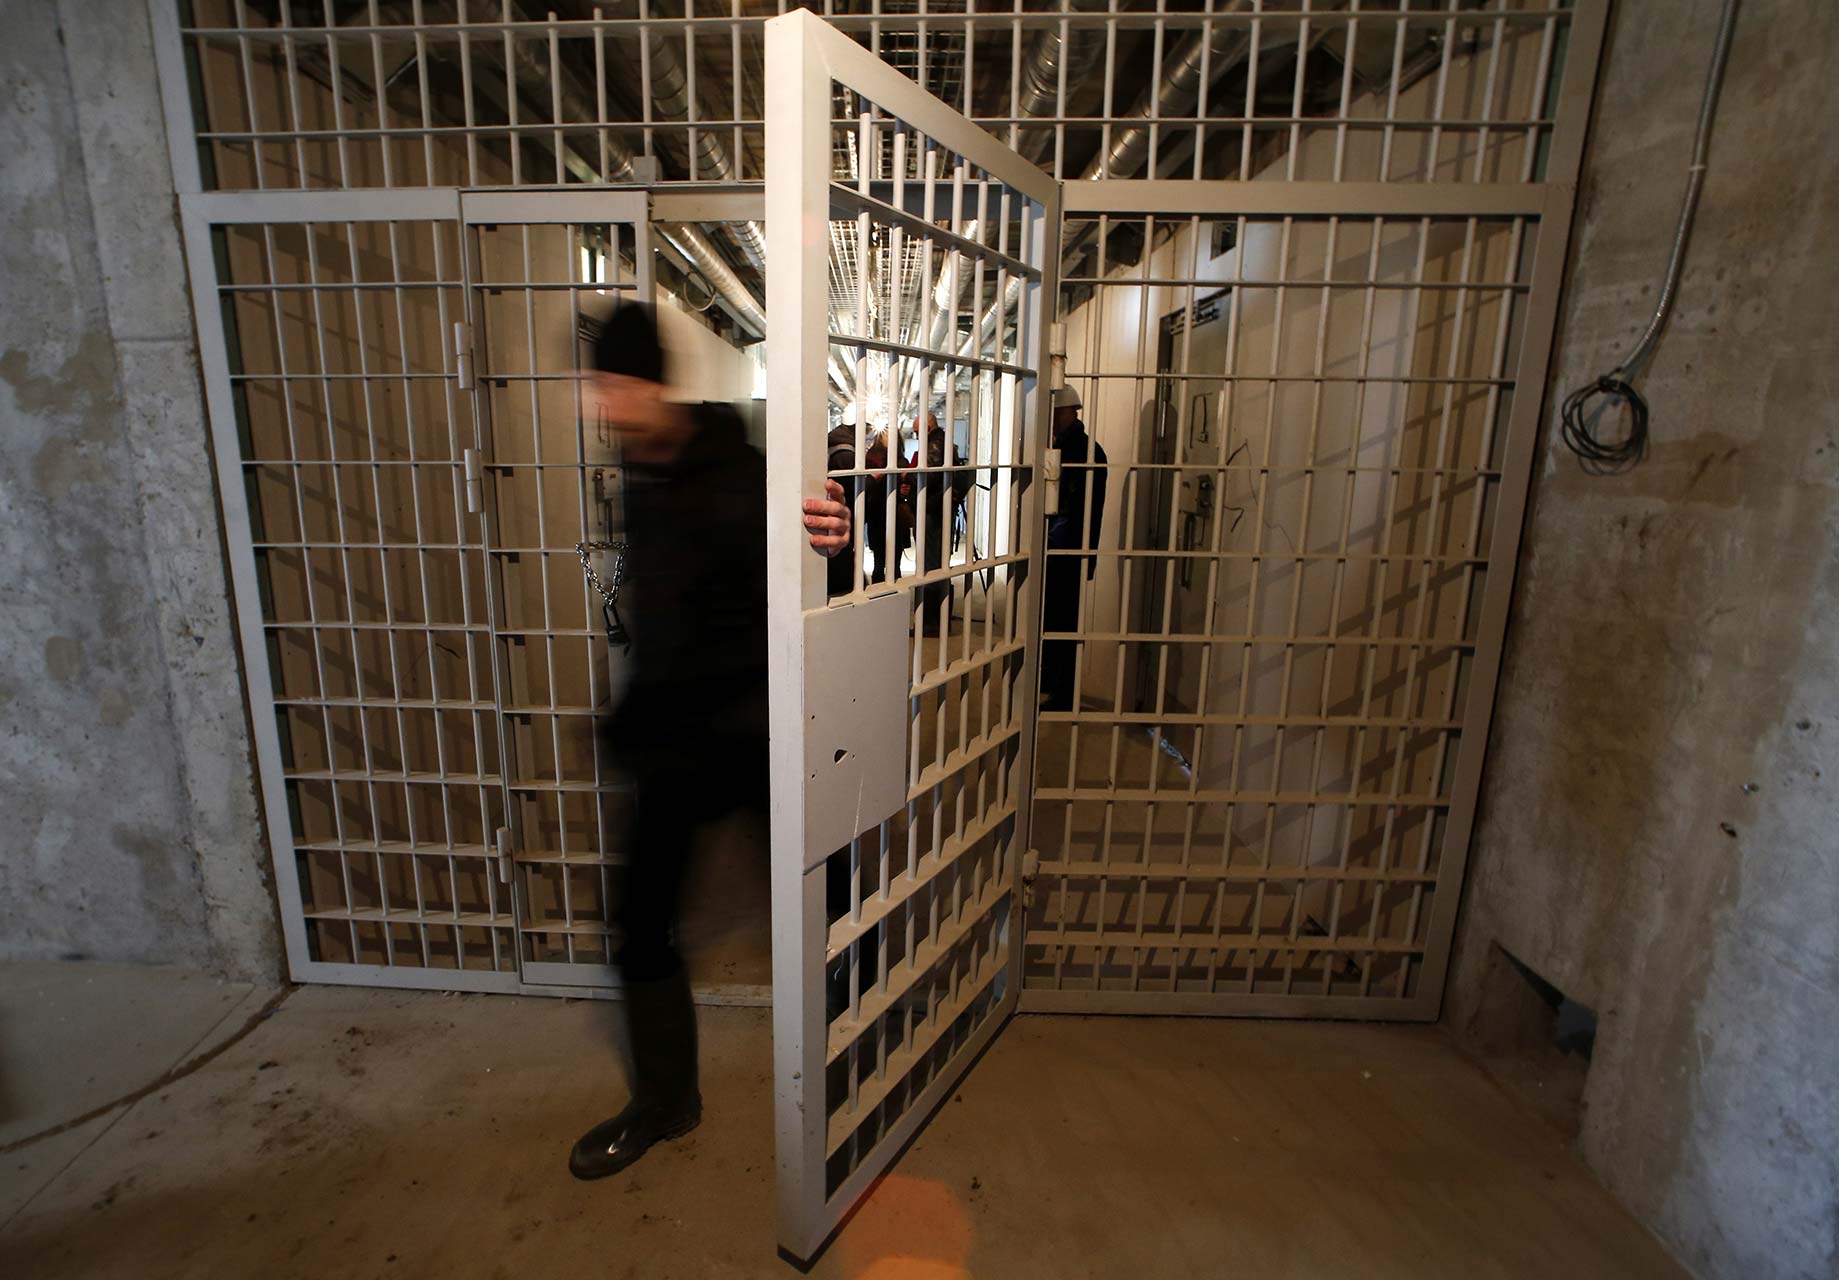 A man walks through a corridor at the Kresy-2 Detention Center outside St. Petersburg, one of the largest prisons in Europe. Credit: Alexander Demianchuk / Reuters